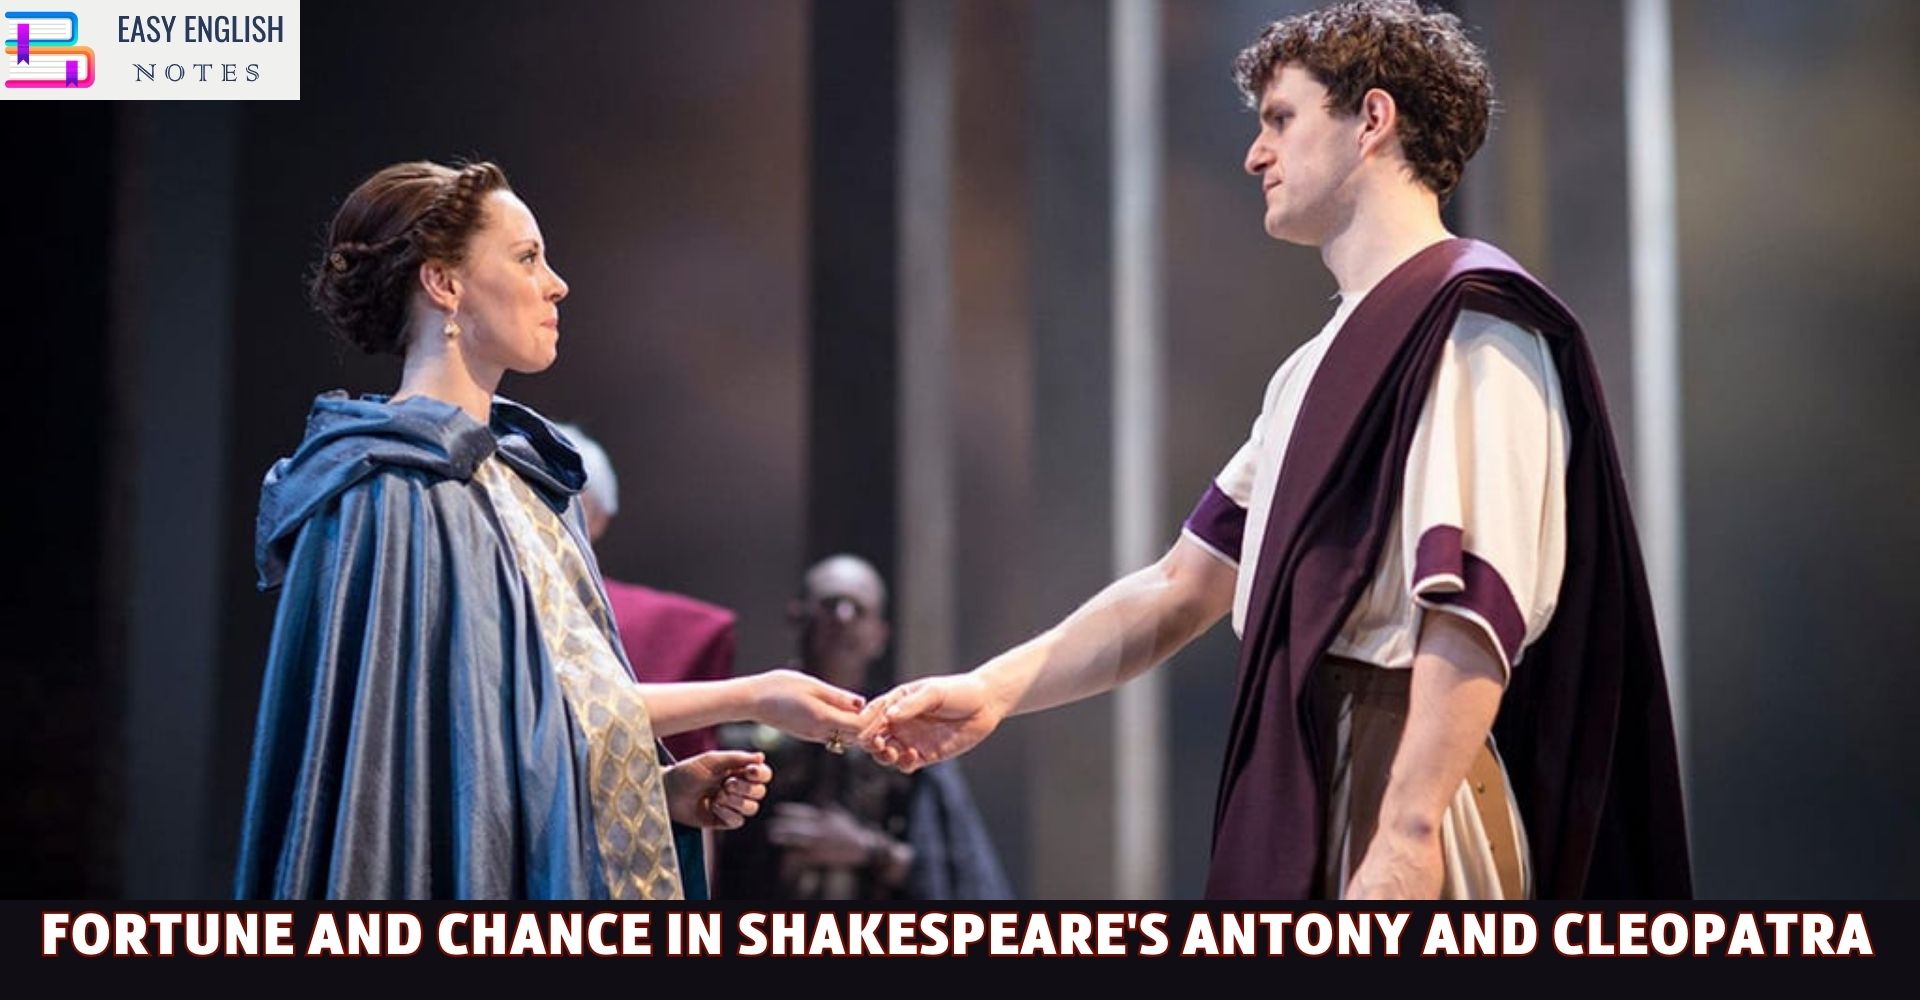 Fortune and Chance in Shakespeare's Antony and Cleopatra